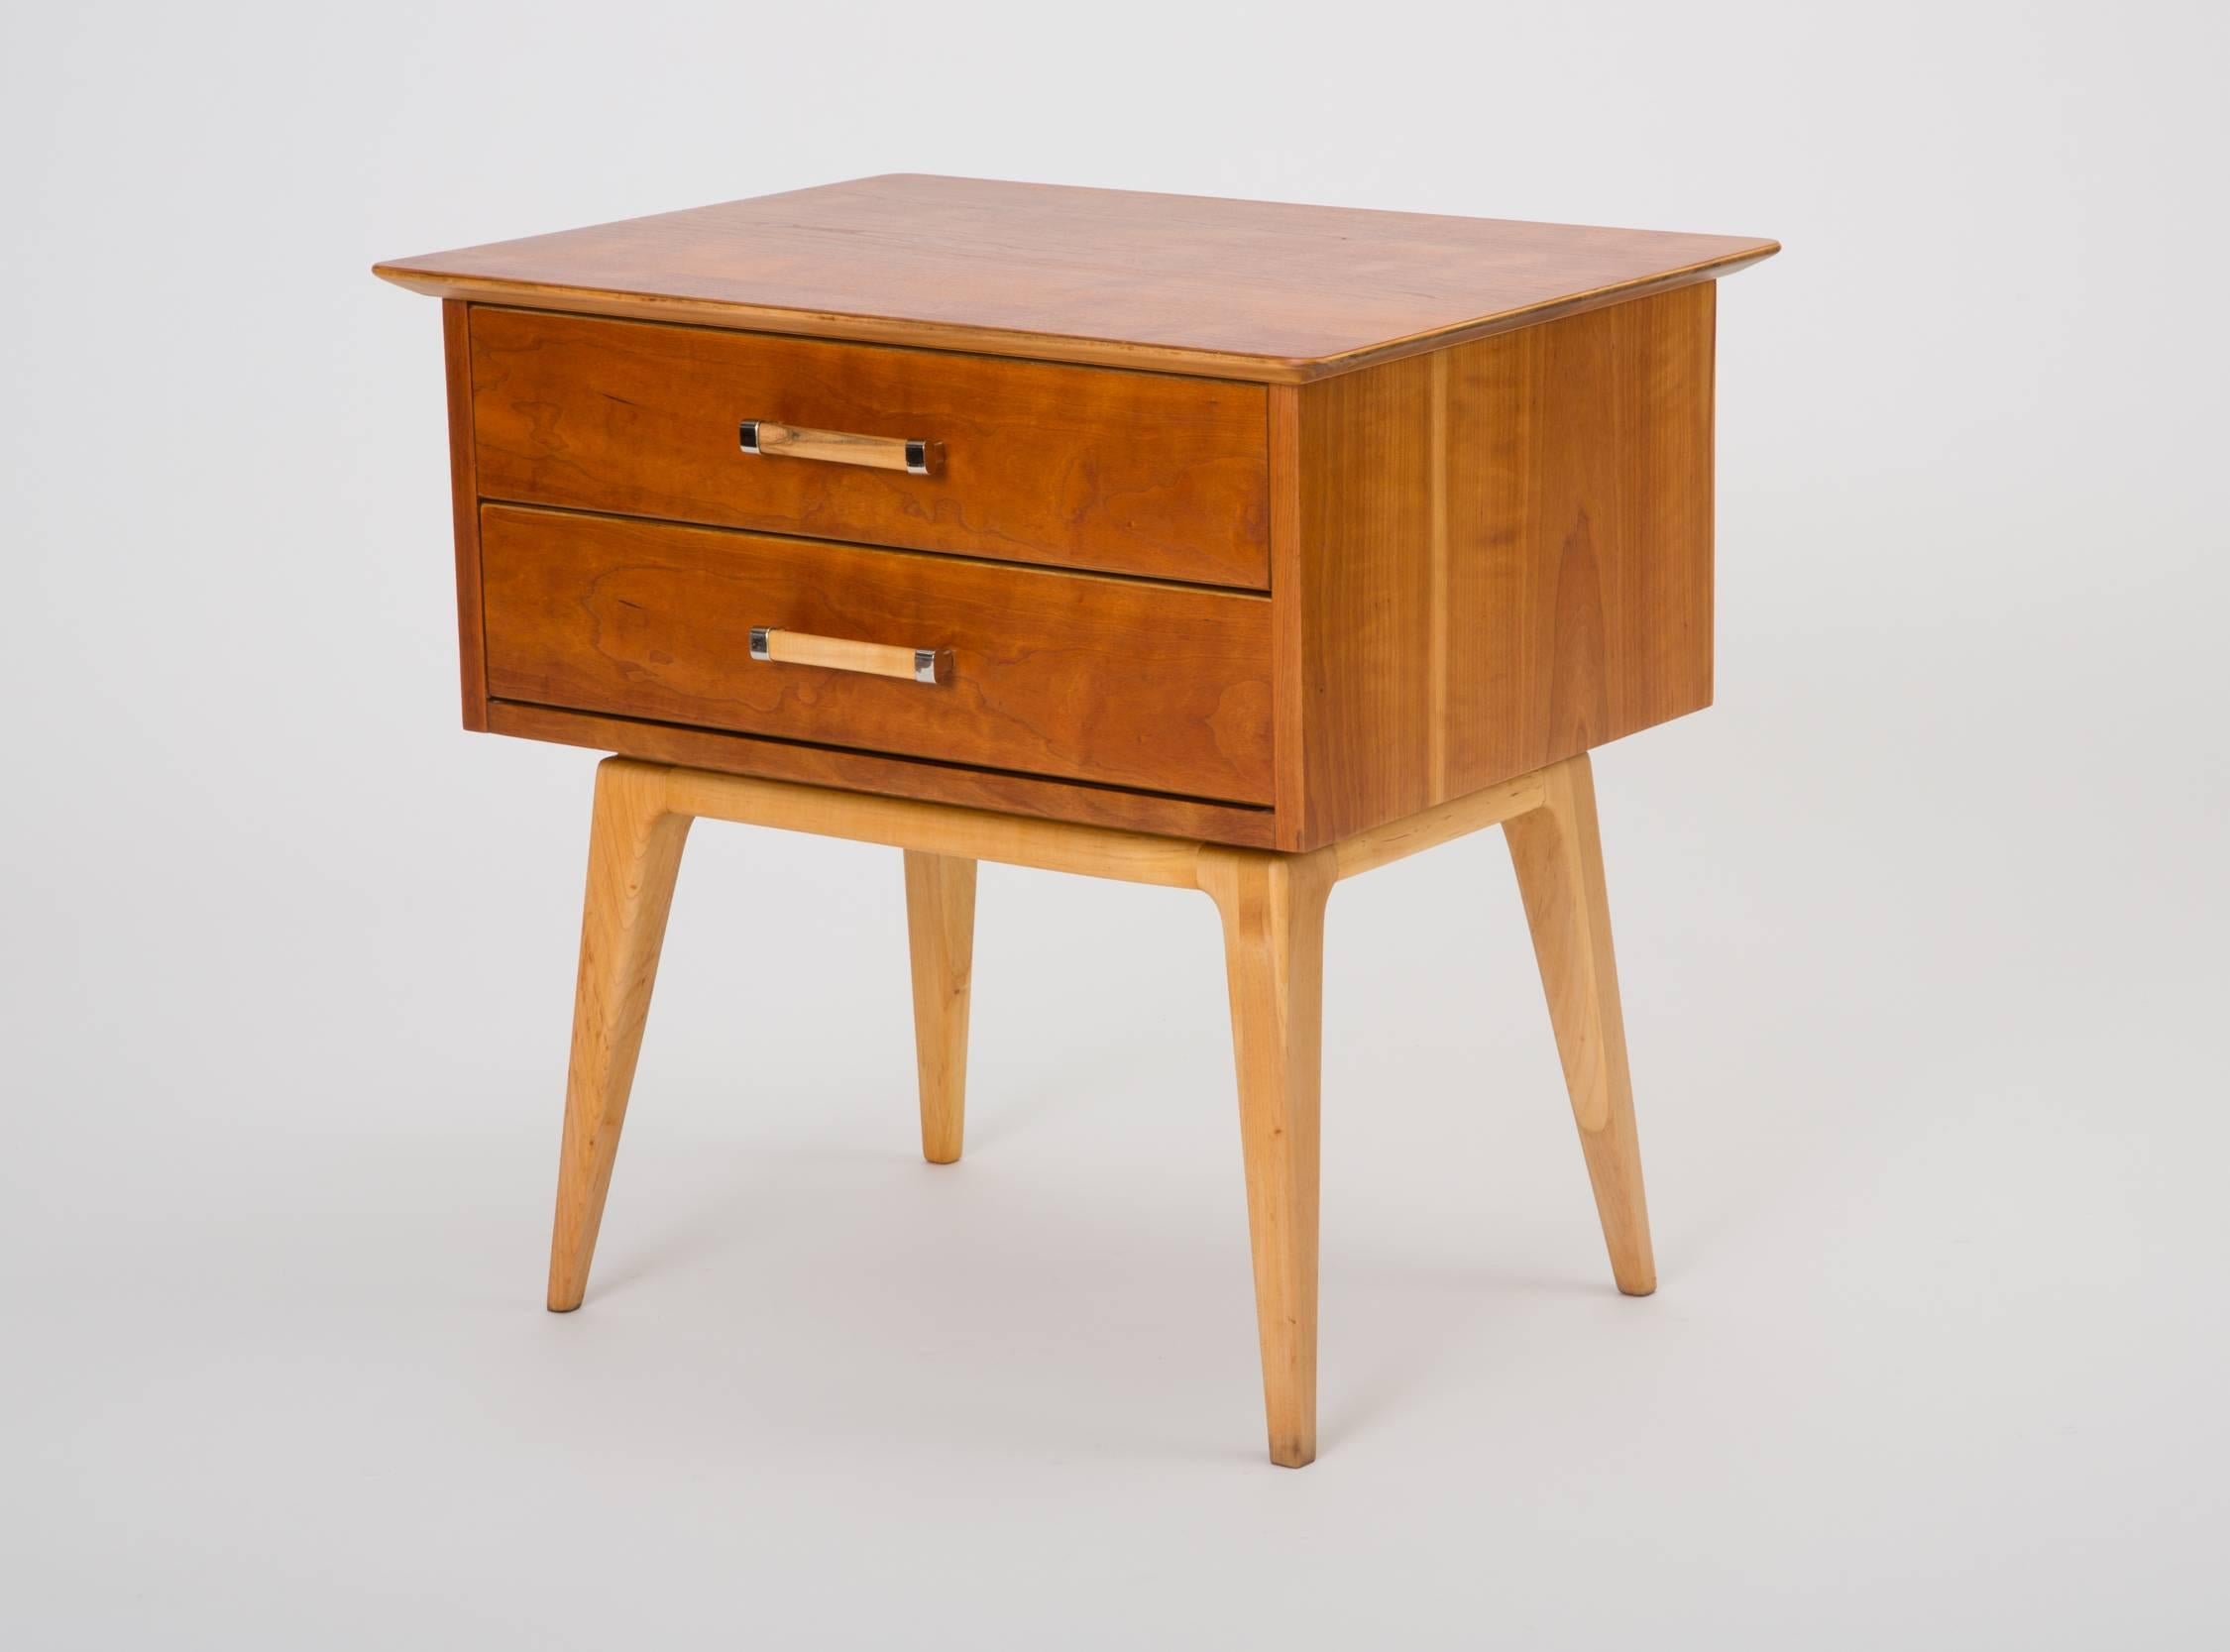 20th Century Pair of Cherrywood Nightstands by Renzo Rutili for Johnson Furniture